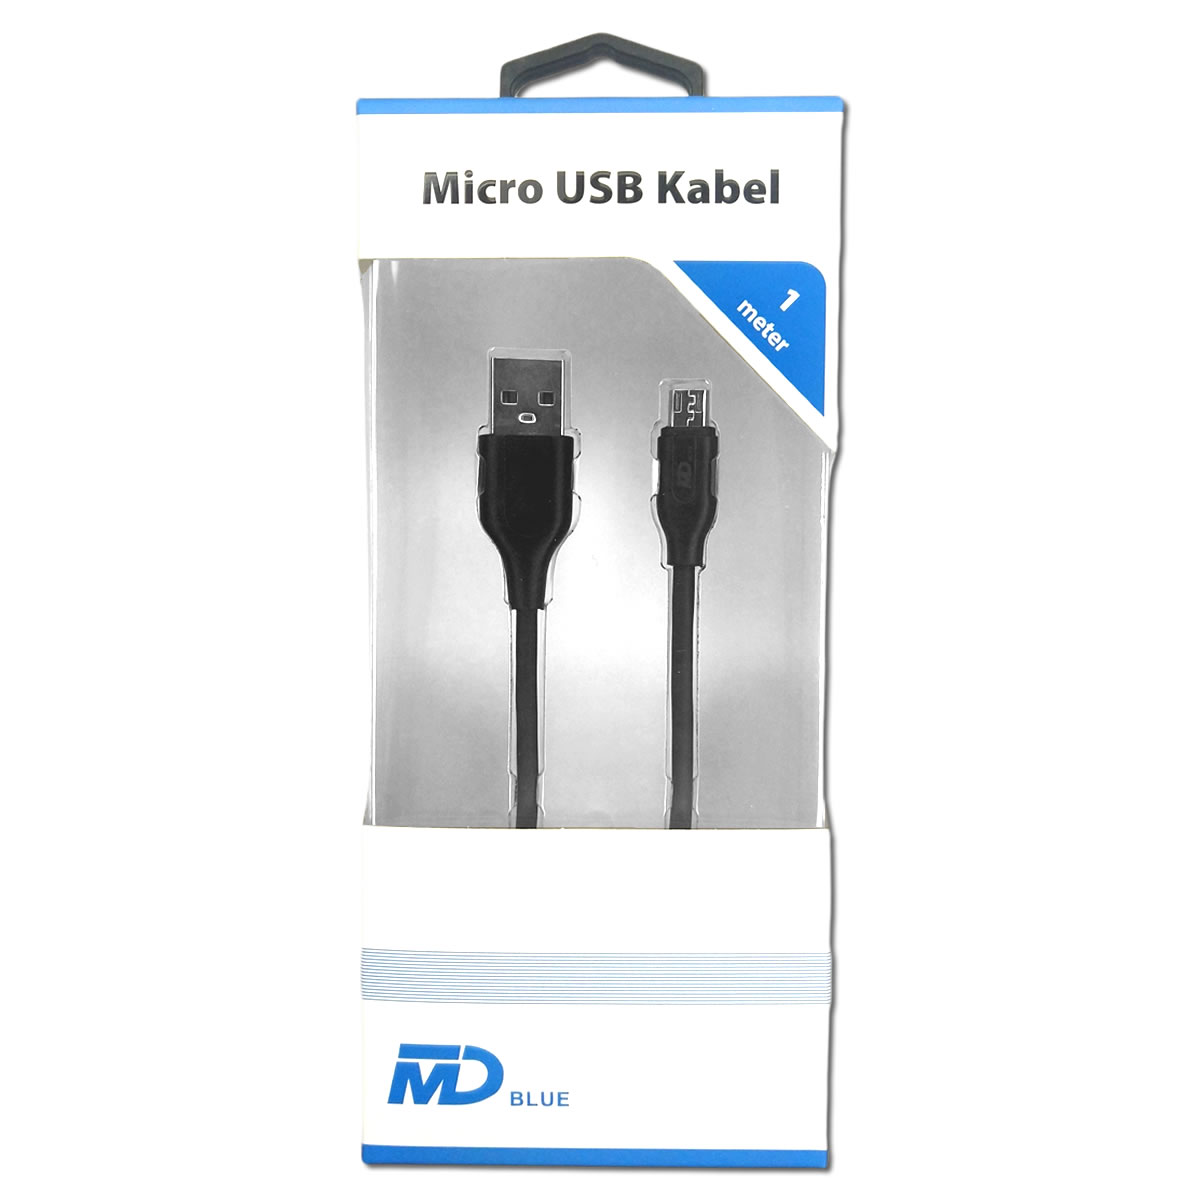 THUISLADER USB MICRO/ANDROID 1 METER - 3 10 20 30 40 50 60 70 80 90 100 110 120 130 133 - 530205